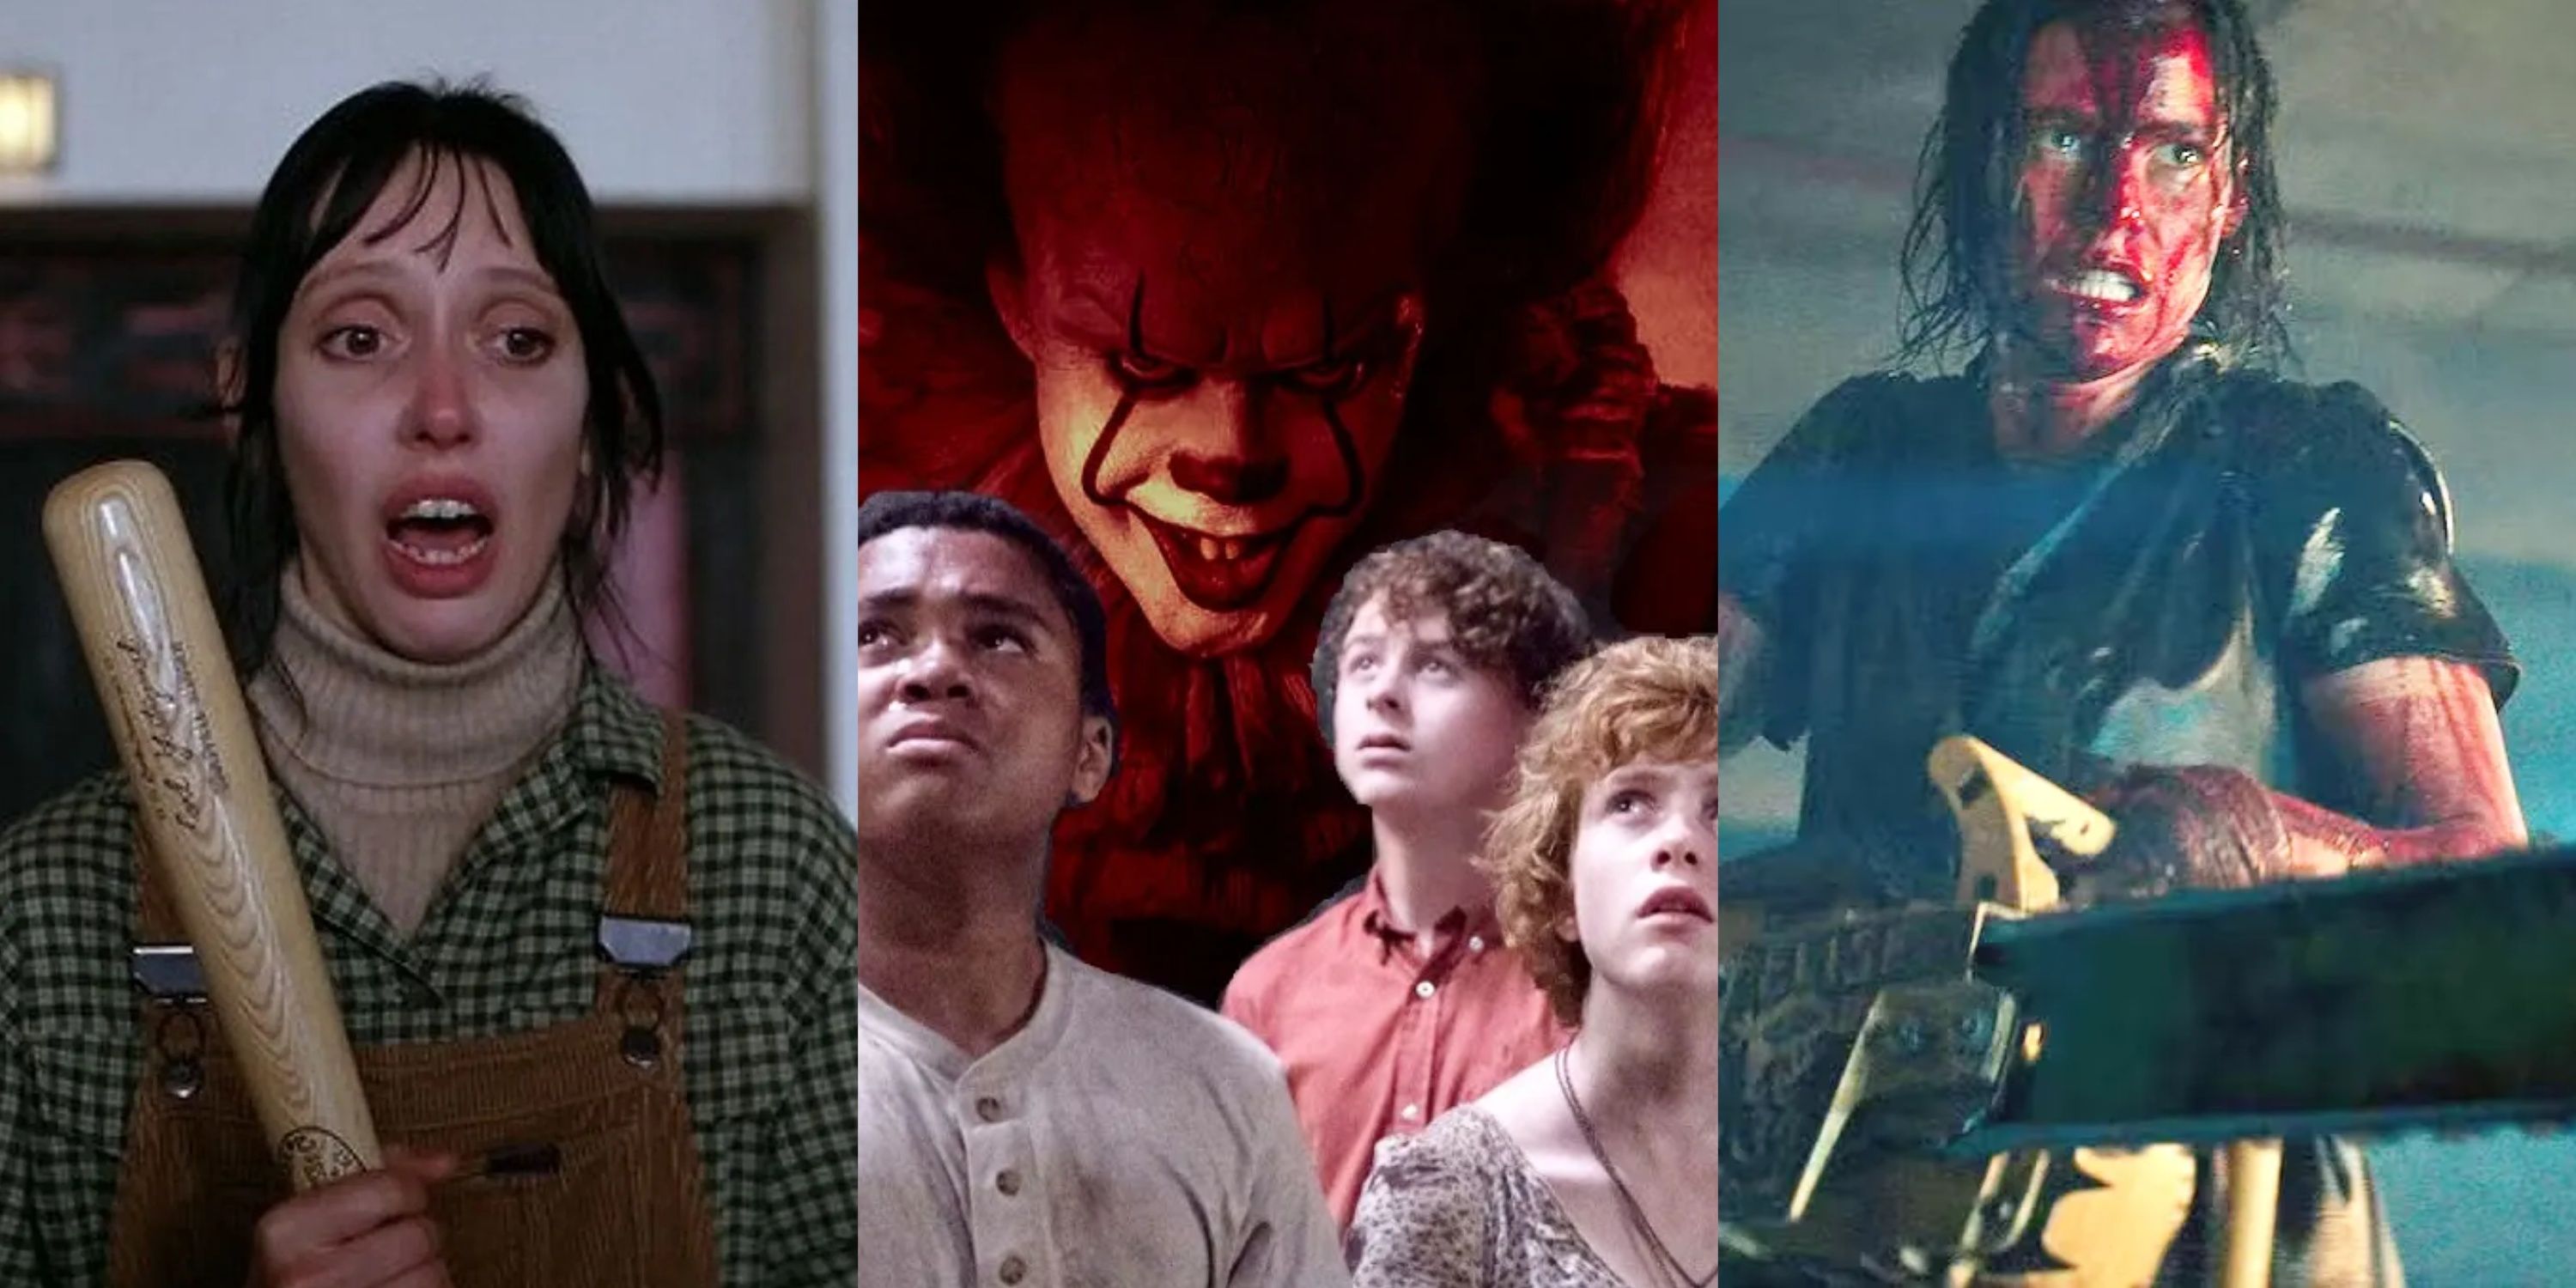 Split image of Wendy Torrance holding a baseball bat, The Loser's Club and Pennywise, Beth holding chainsaw